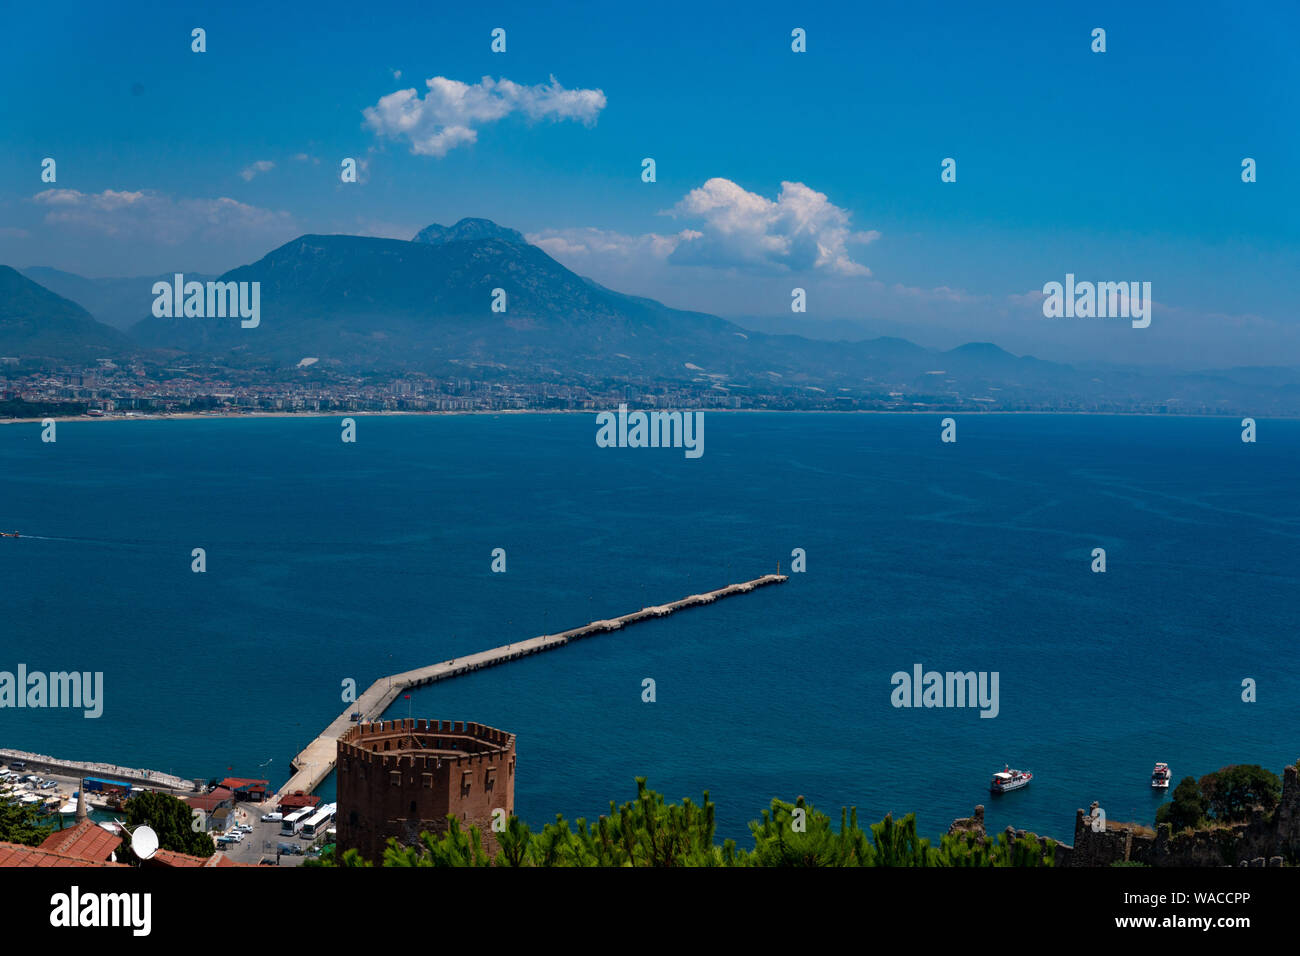 Red Alan Tower on the Mediterranean coast in flowering flora and paths for tourists Alanya, Turkey beautiful background for postcard, booklet Stock Photo